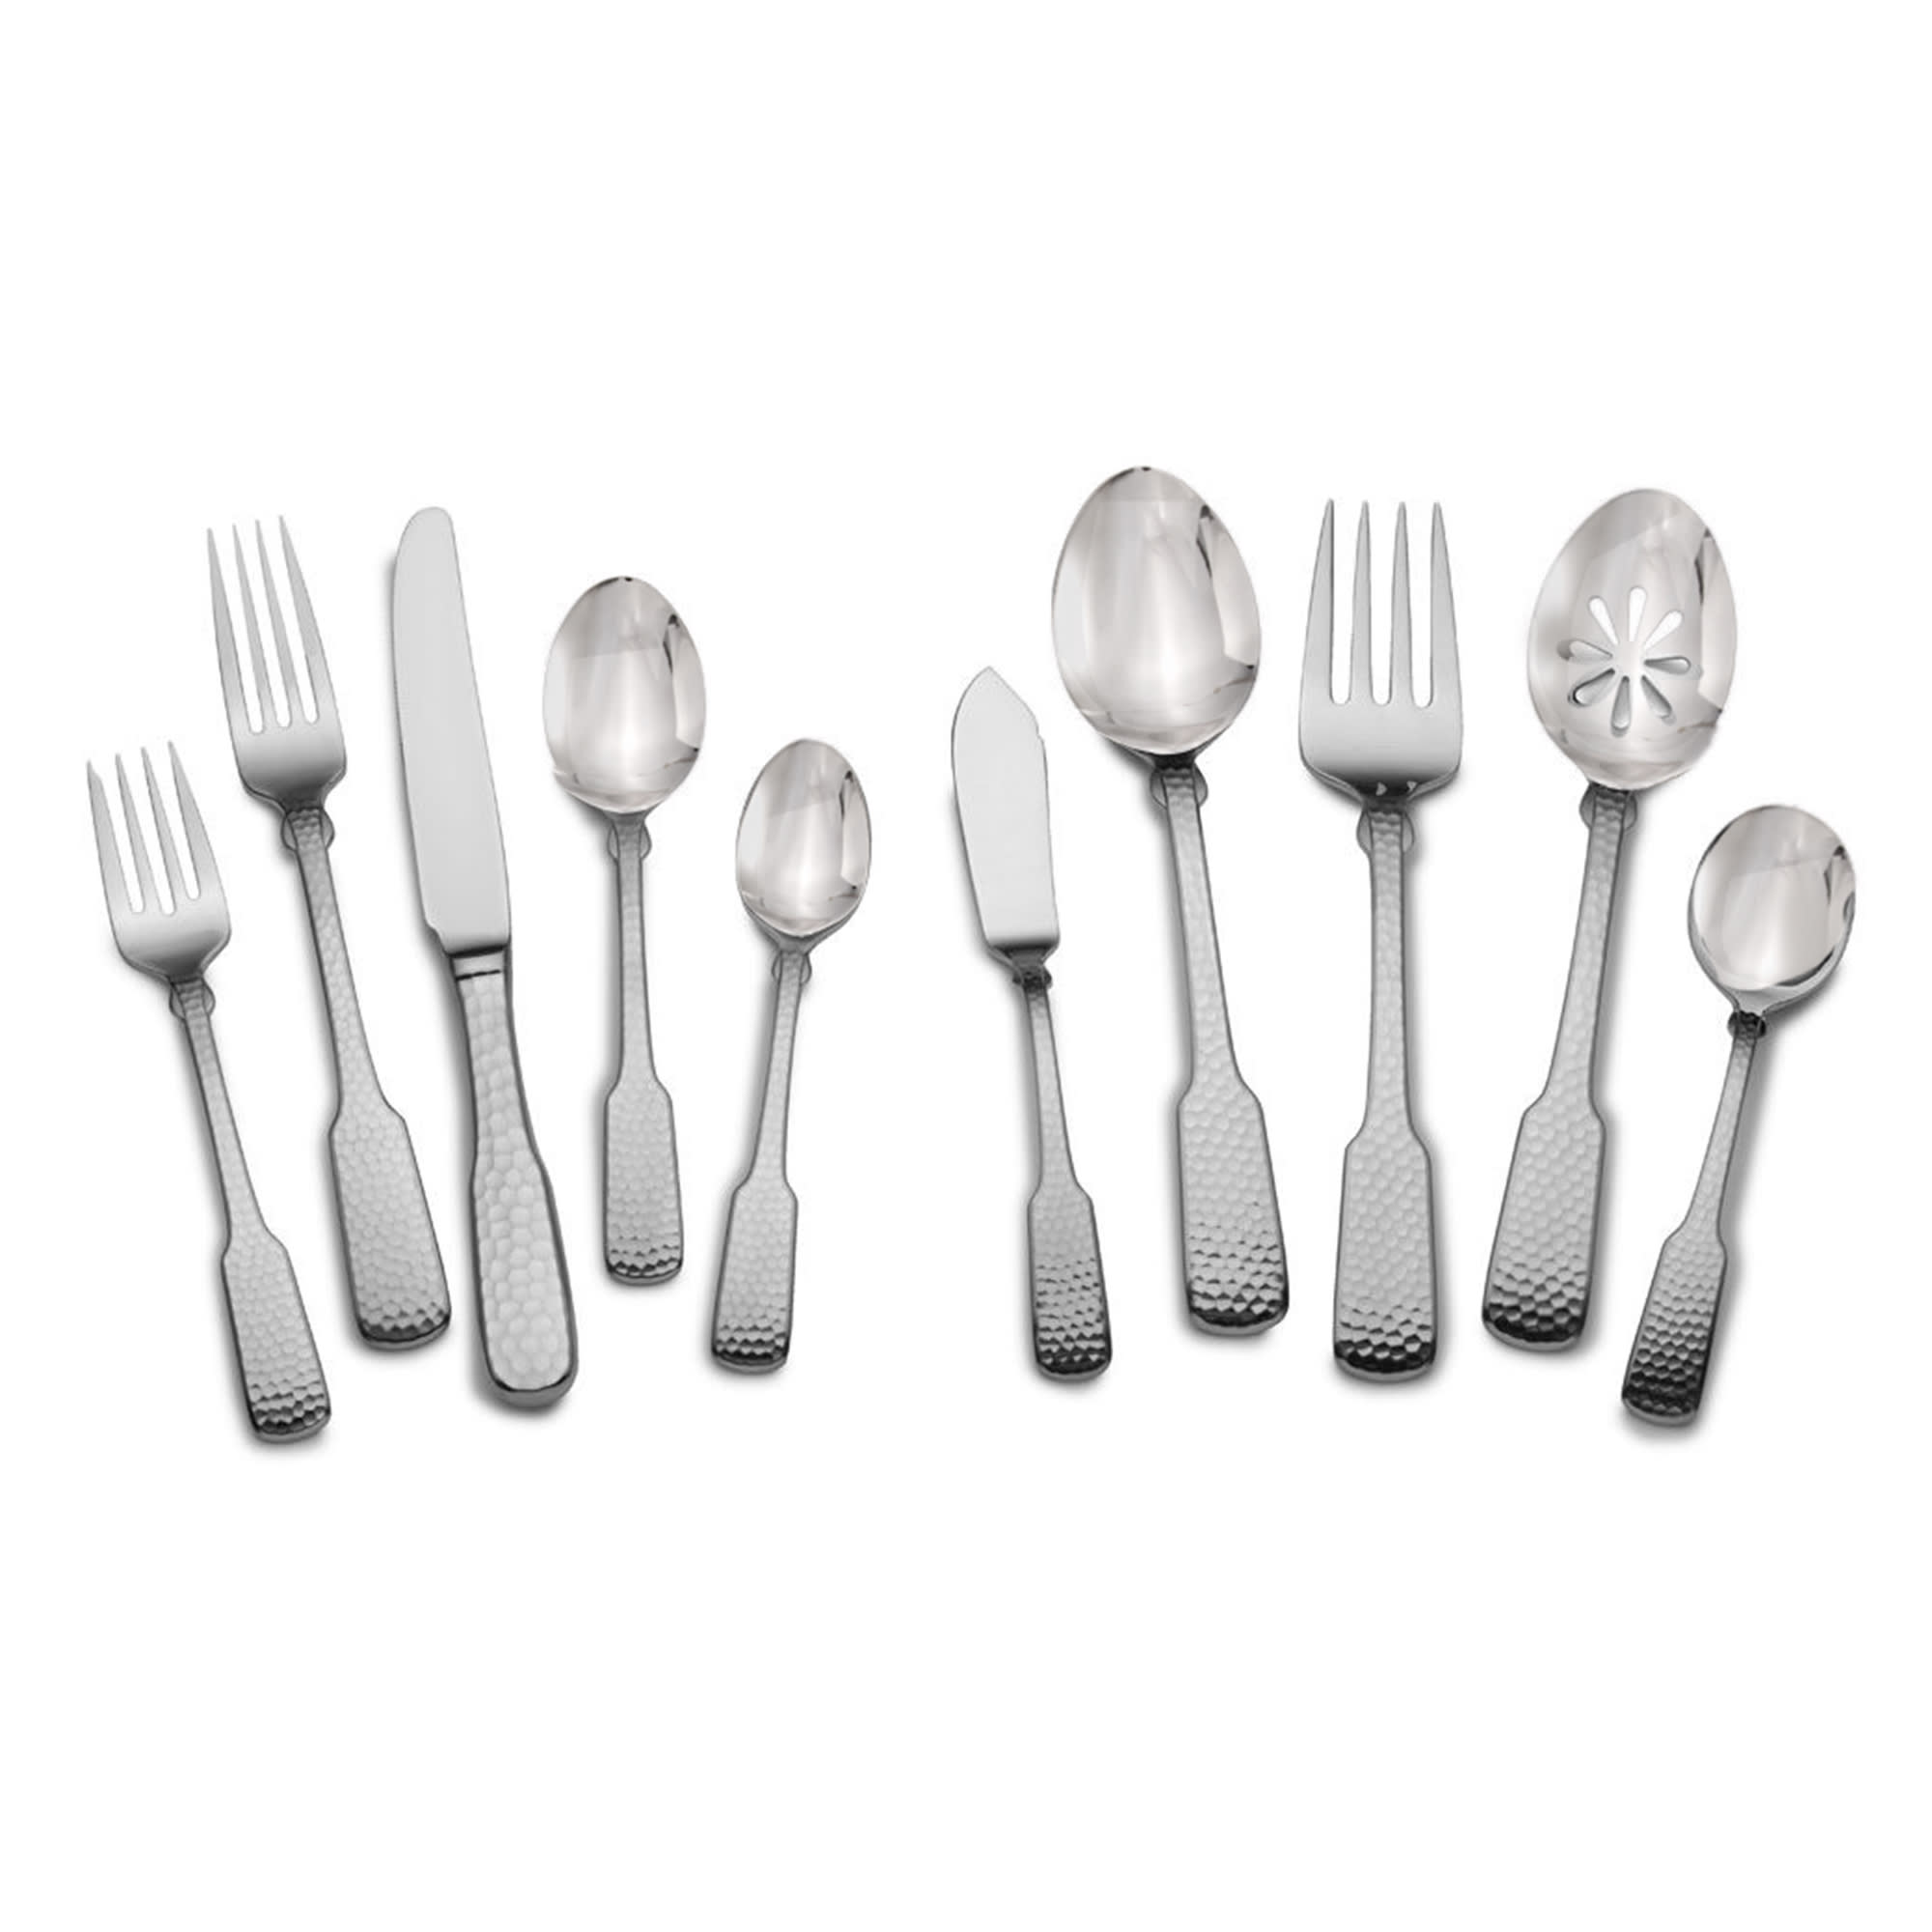 https://media.ross-simons.com/image/fetch/f_auto,q_auto/https://www.ross-simons.com/on/demandware.static/-/Sites-lbh-master/default/dwee2a3a8b/images/flatware-stainless-bridal/350281.jpg